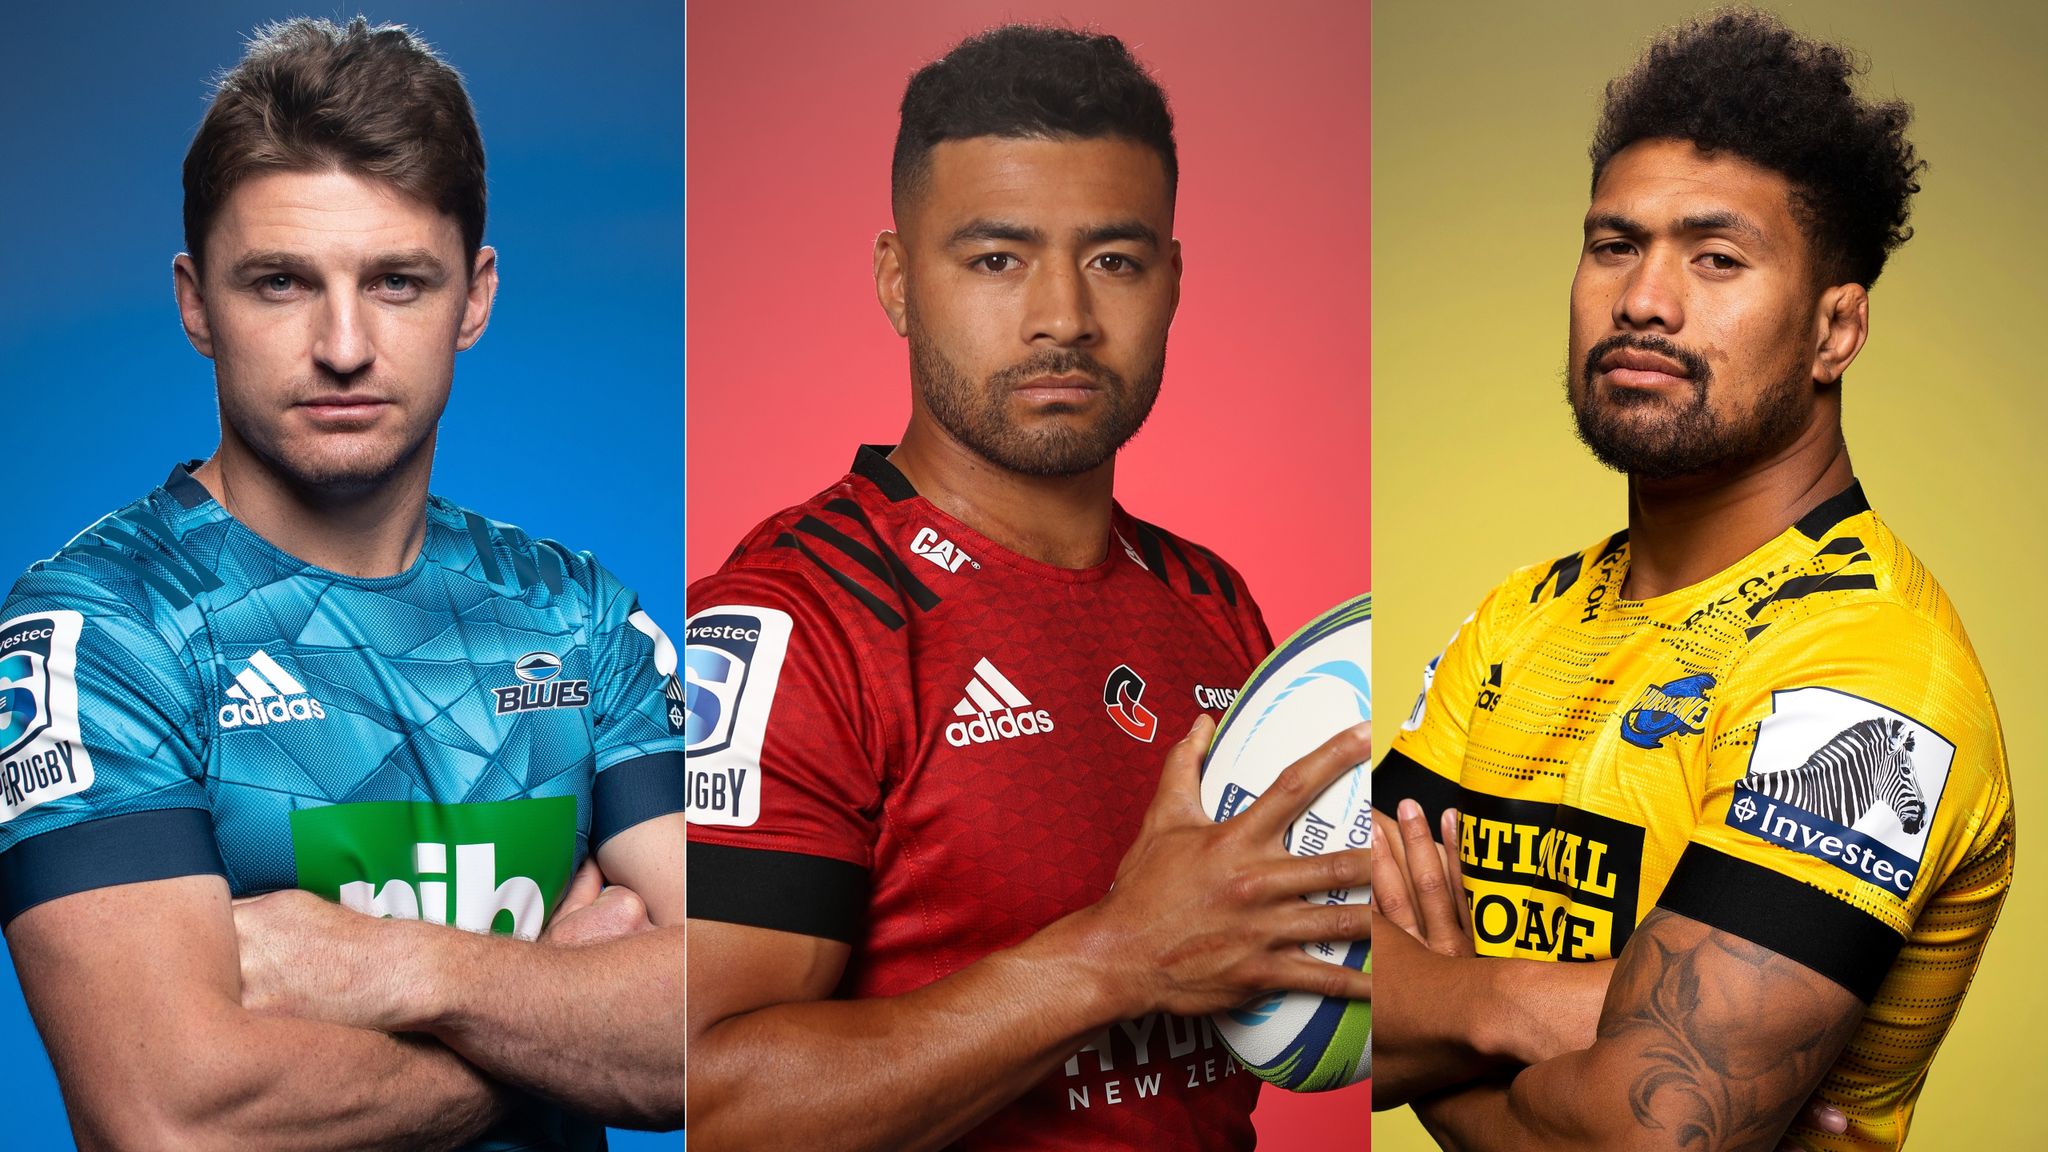 Super Rugby Aotearoa Ones to watch Rugby Union News Sky Sports